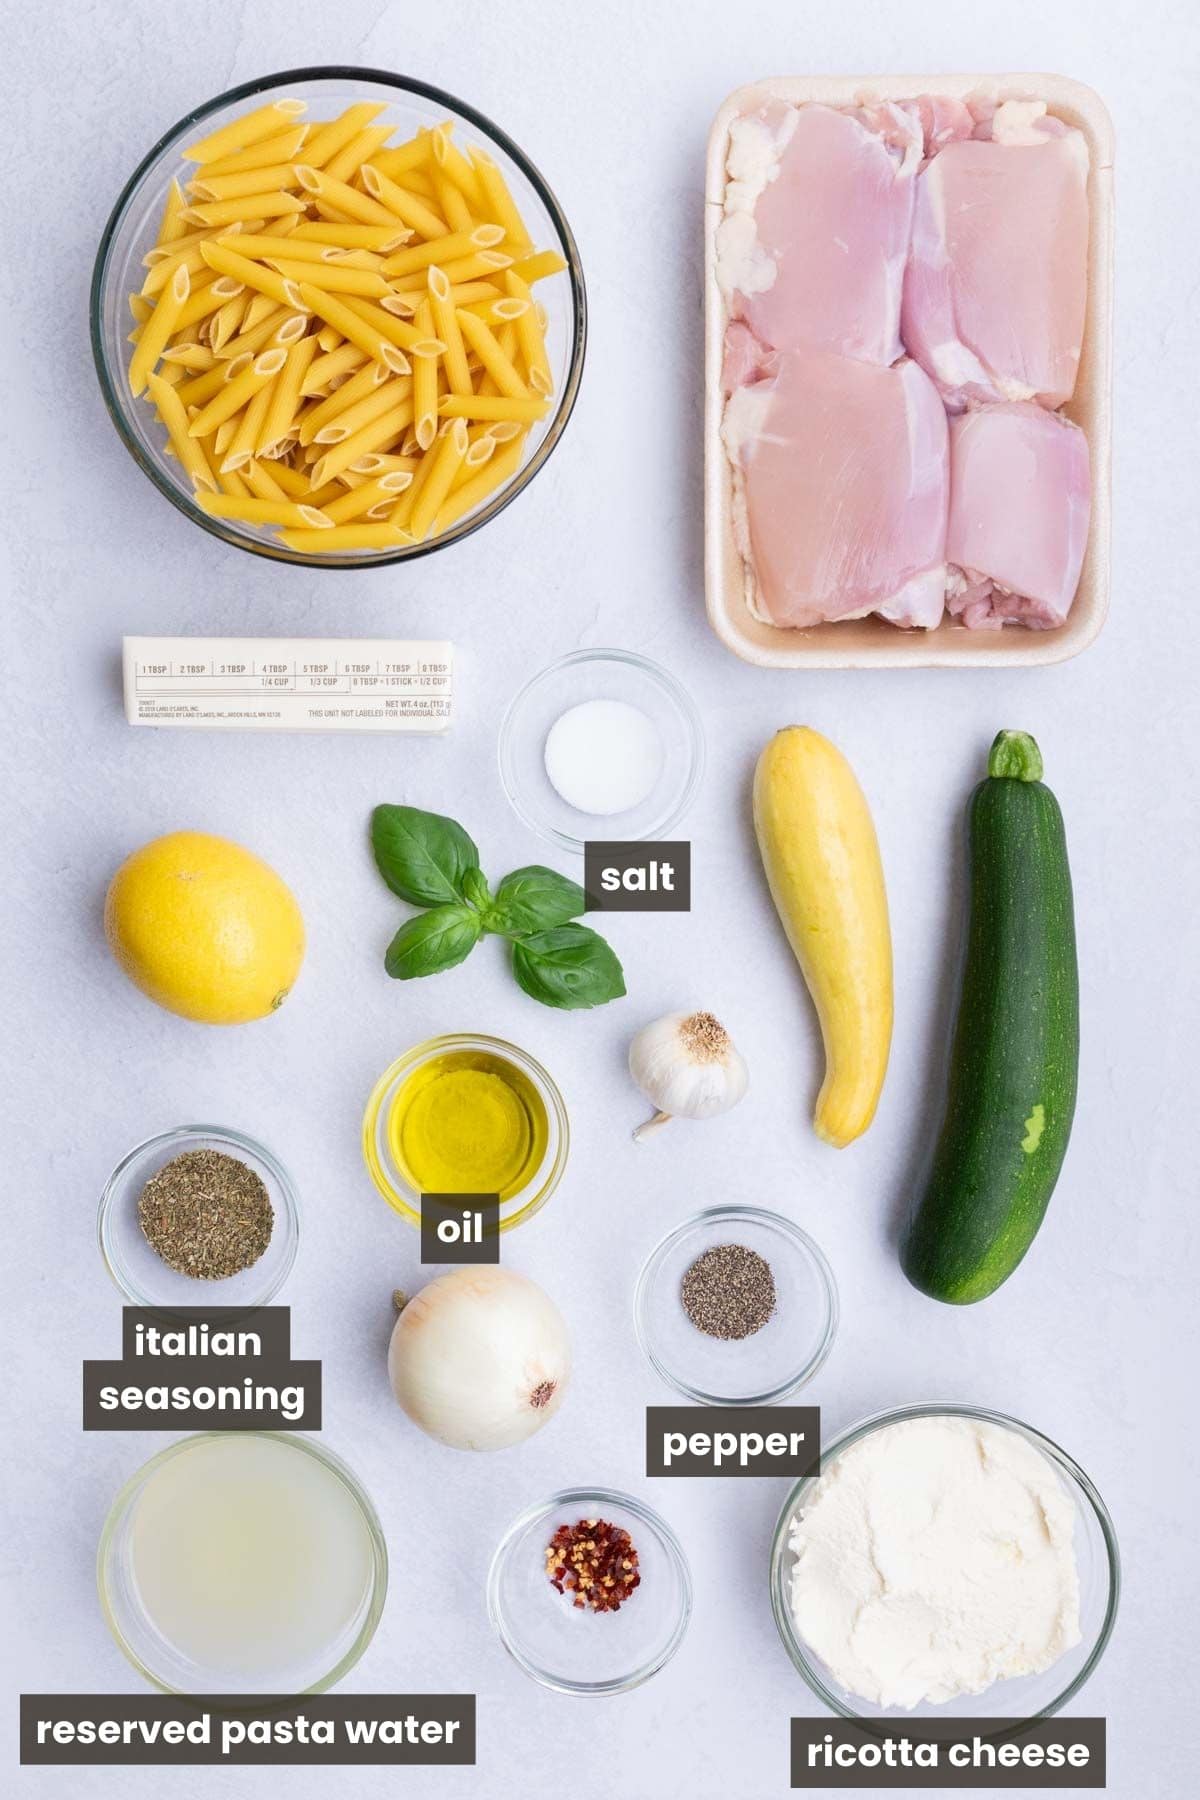 Chicken thighs, pasta, zucchini, squash, onion, lemon, and ricotta are the main ingredients for this dish.